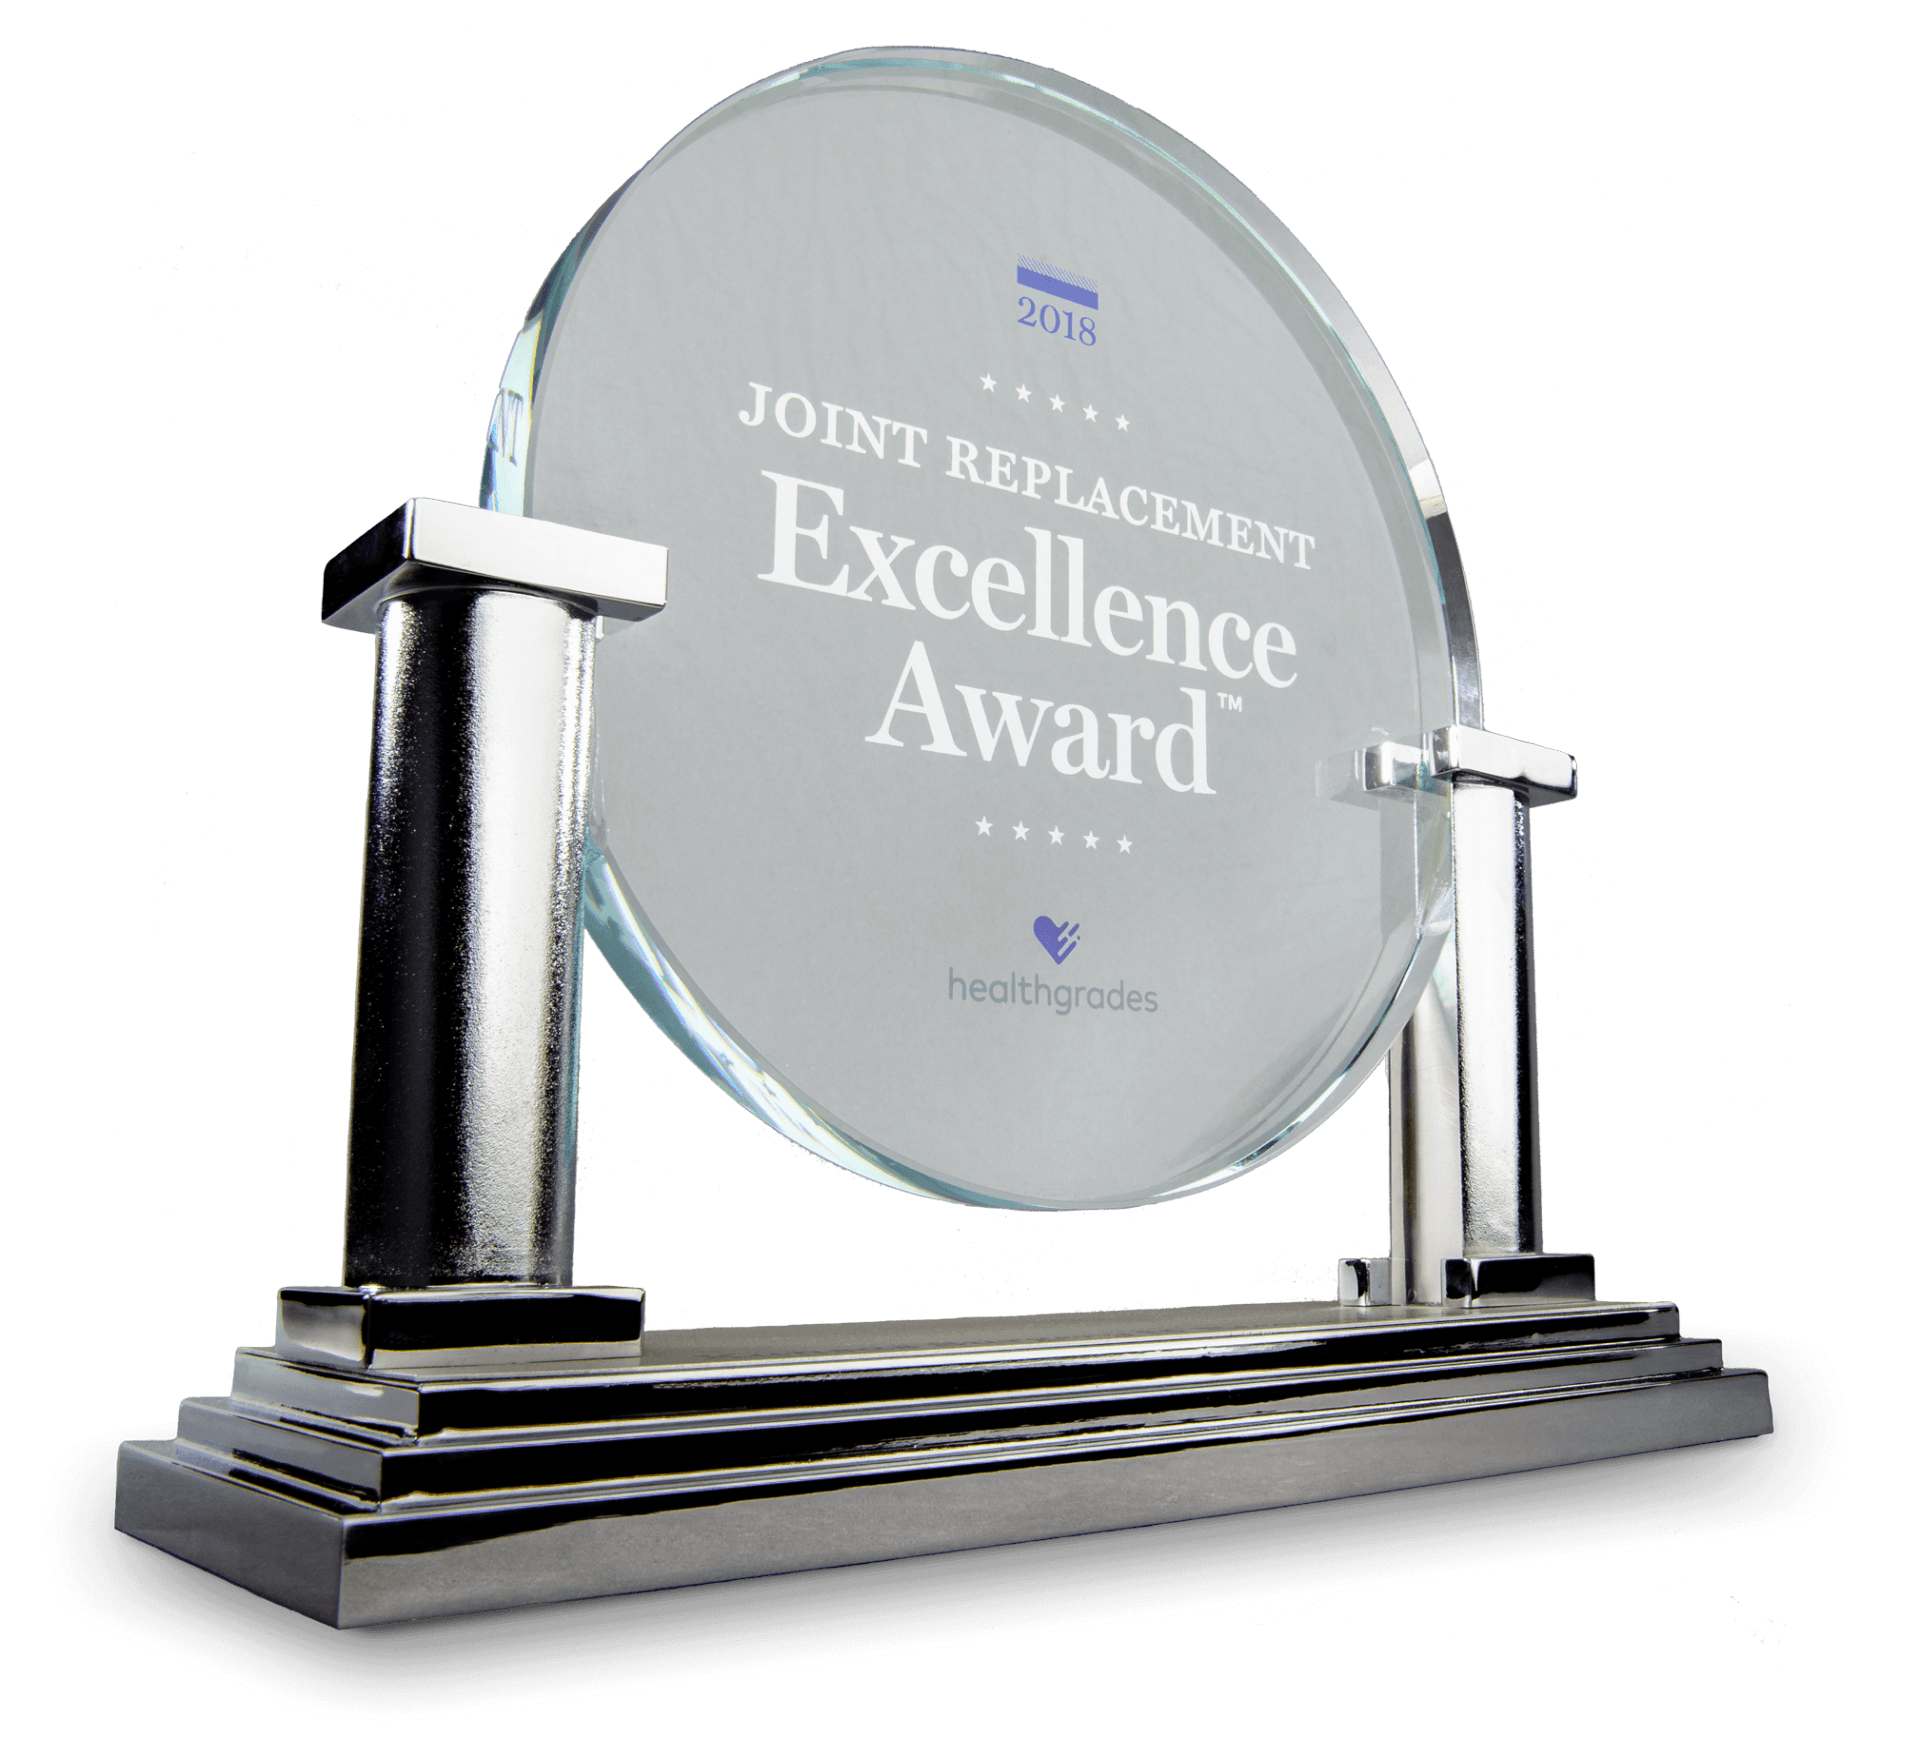 Kansas Surgery and Recovery Center's Joint Replacement Excellence Award was given by Healthgrades for twenty-eighteen